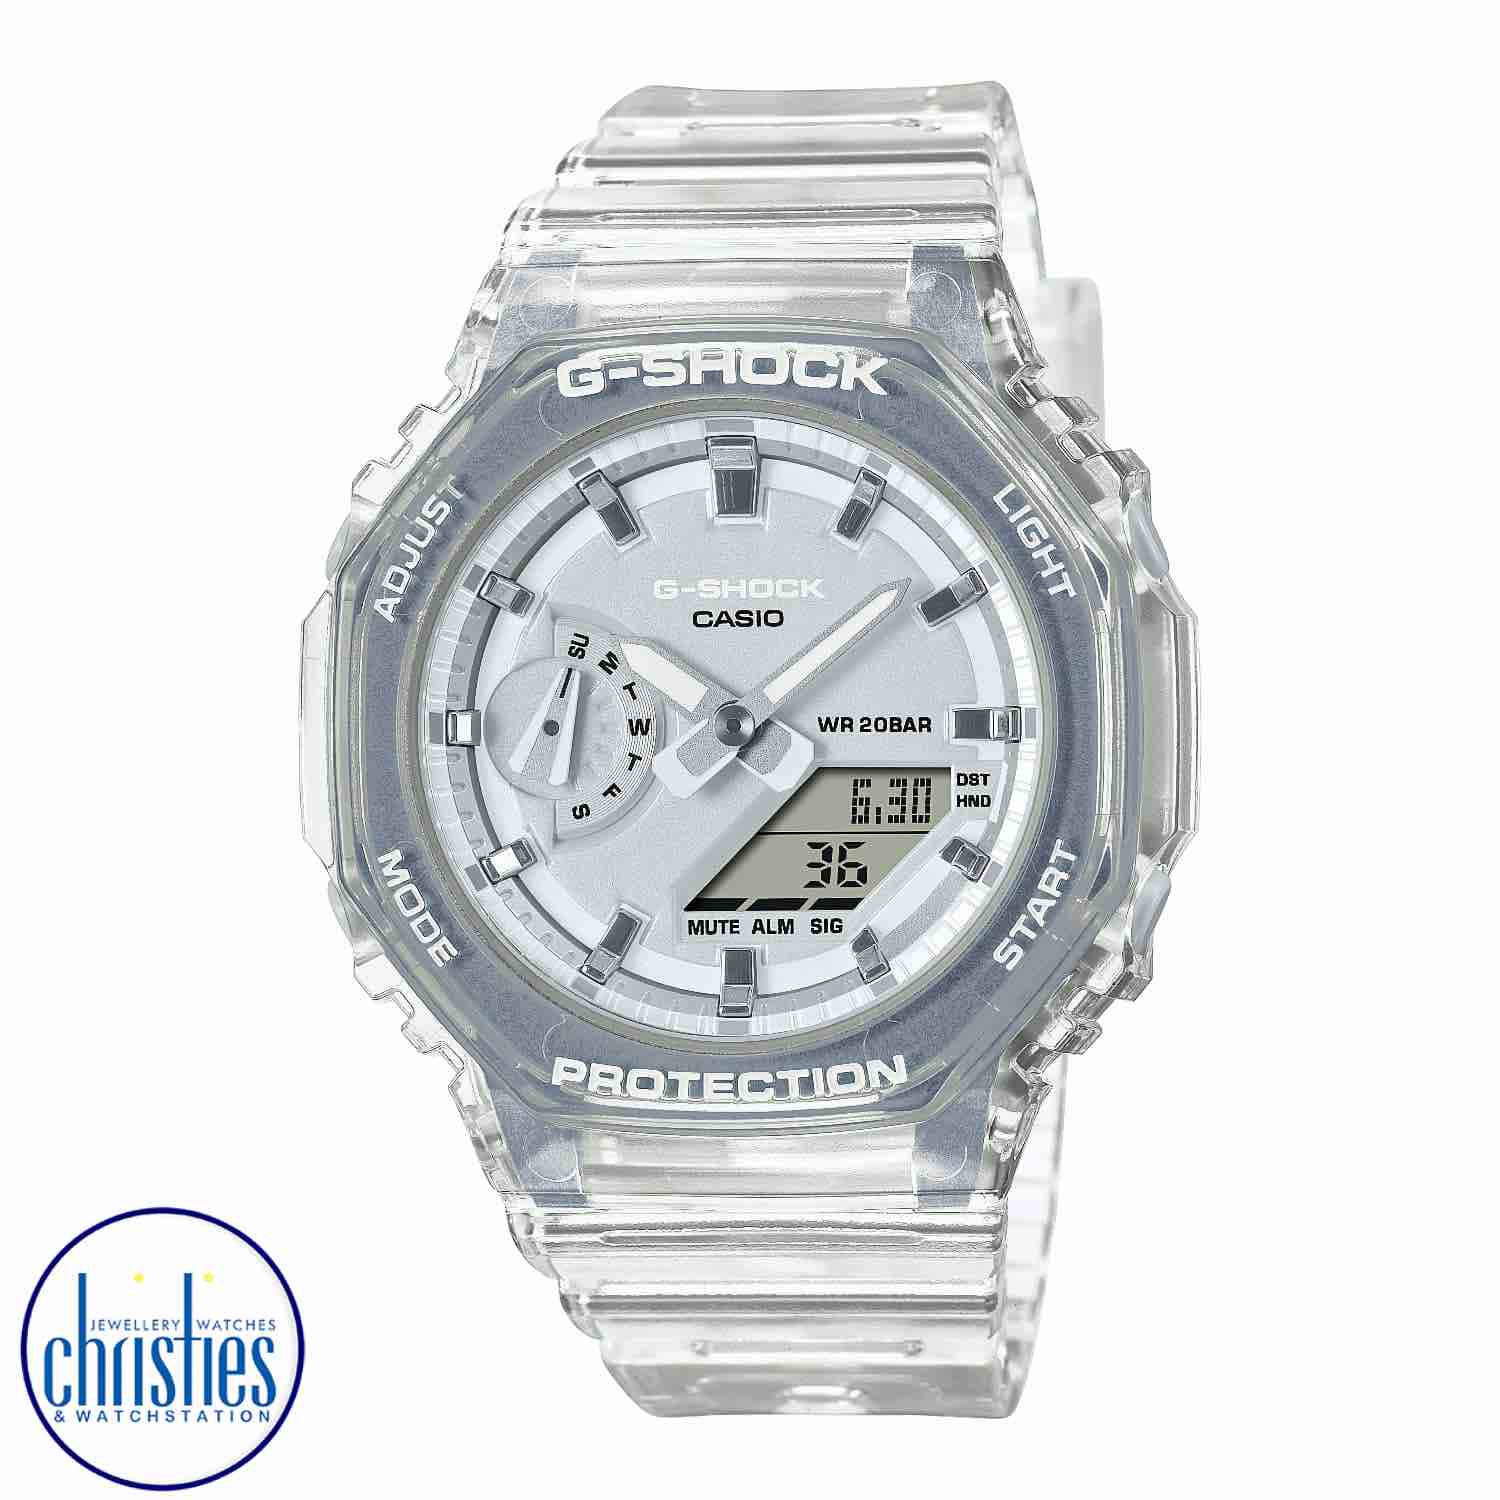 GMAS2100SK-7A G-SHOCK Metallic Translucent Womens Watch. Slip on a splash of clear metallic pleasure with the ever-popular analog-digital combination GA-2100 in a slimmer, more compact profile.